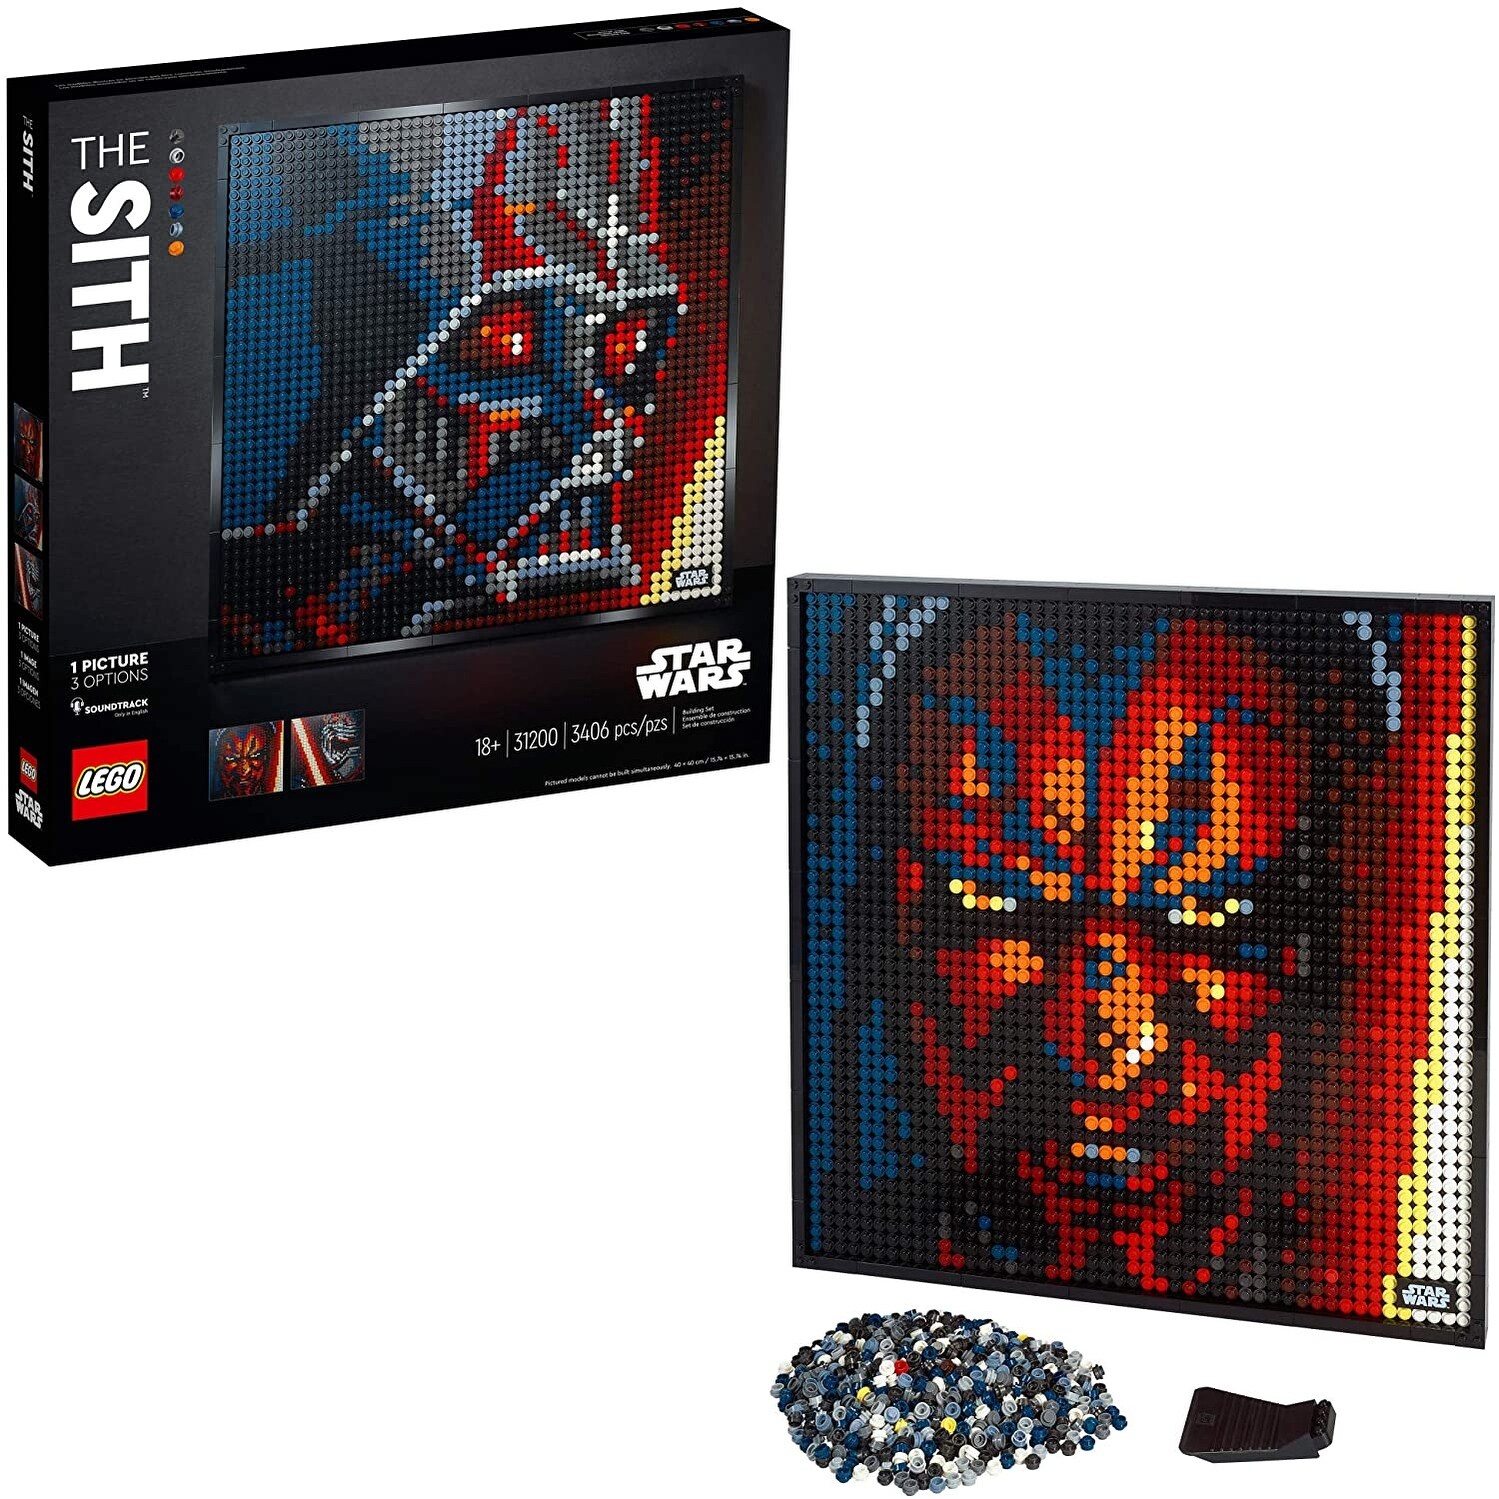 LEGO 31200 The Star Wars The Sith Lord Building Kit